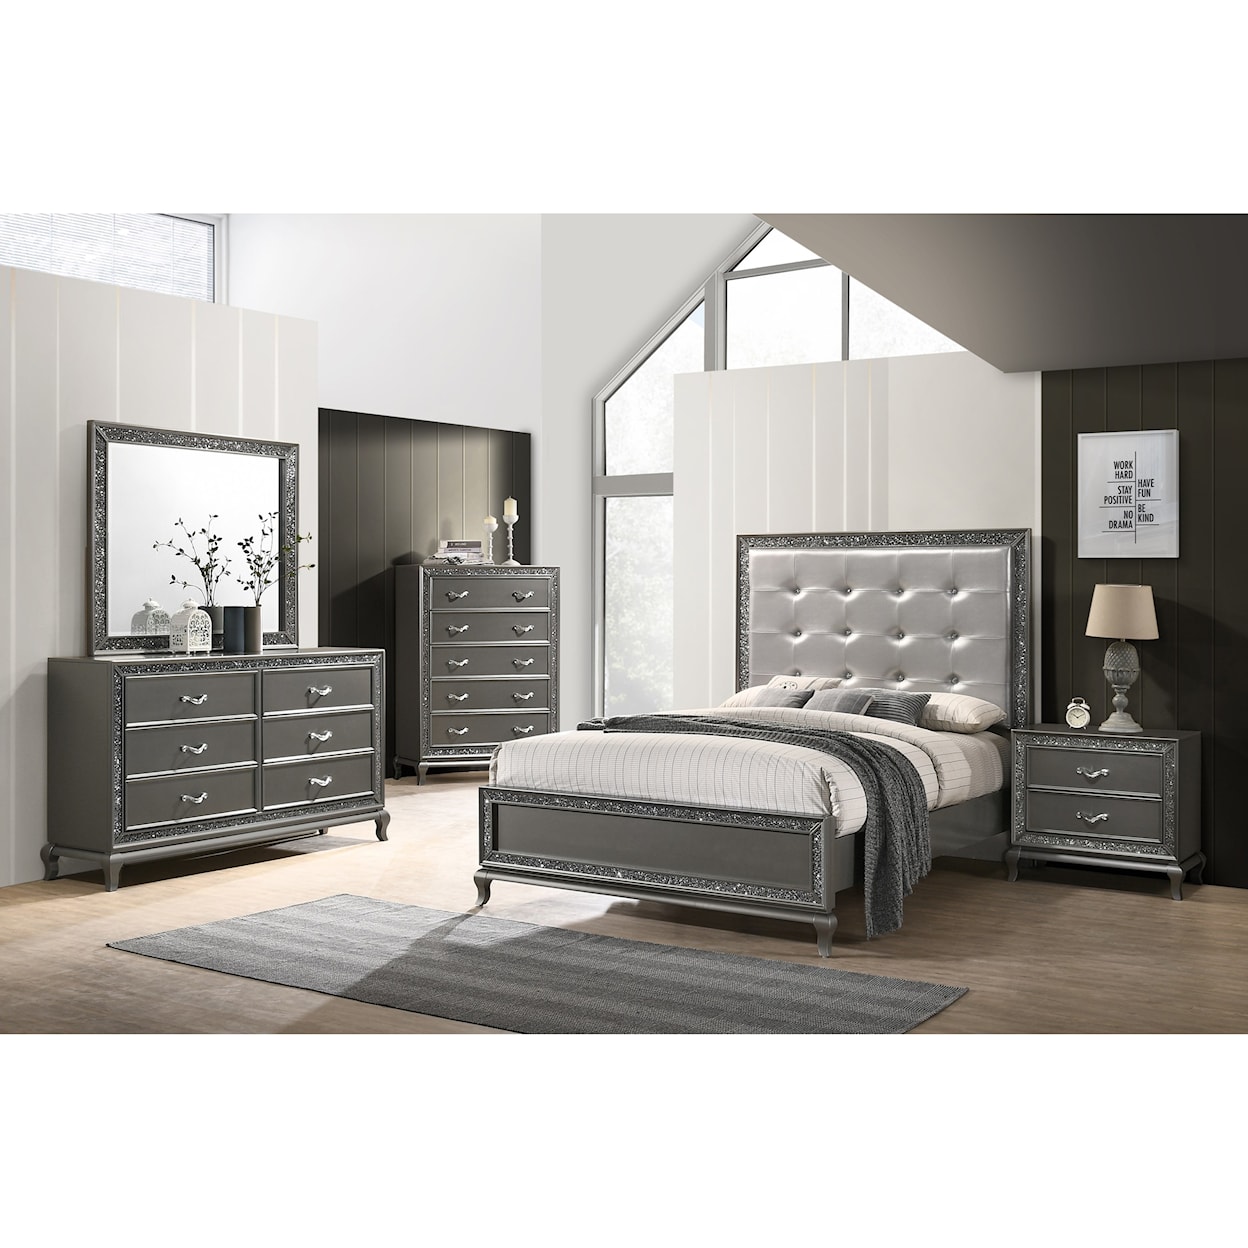 New Classic Park Imperial Twin Bedroom Group